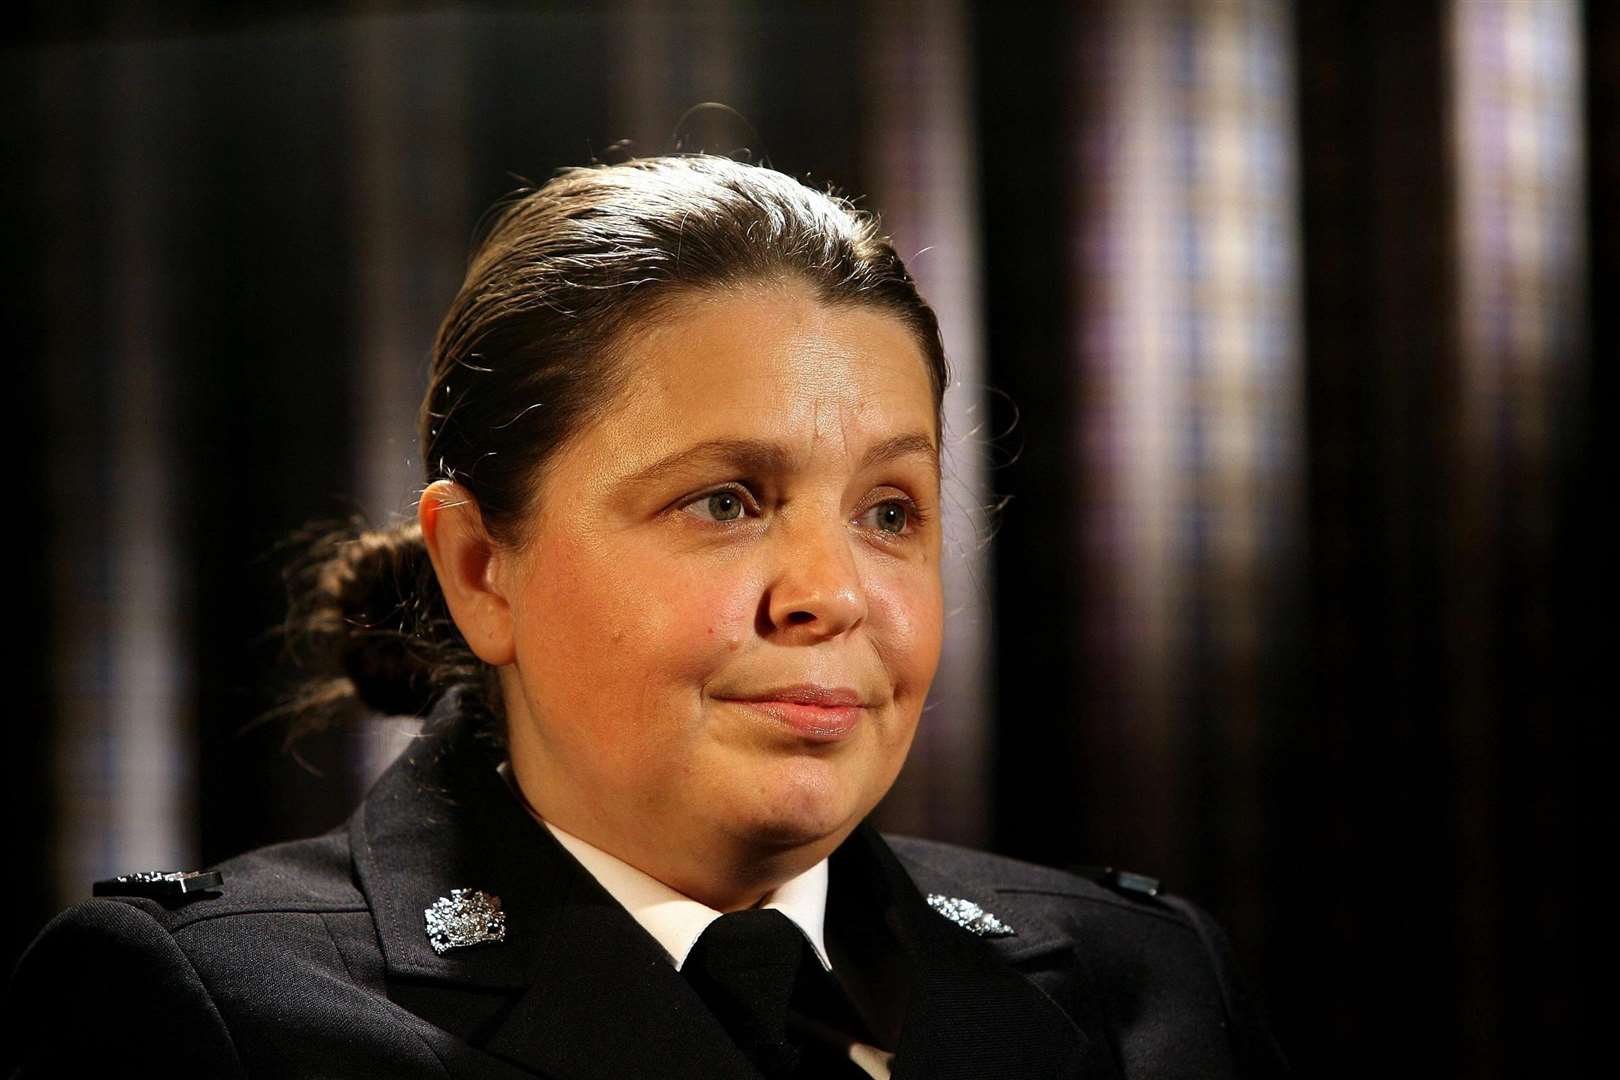 Pc Theresa Milburn, who answered the call along with Pc Sharon Beshenivsky, has said she thinks of Sharon ‘every day’ (Peter Byrne/PA)